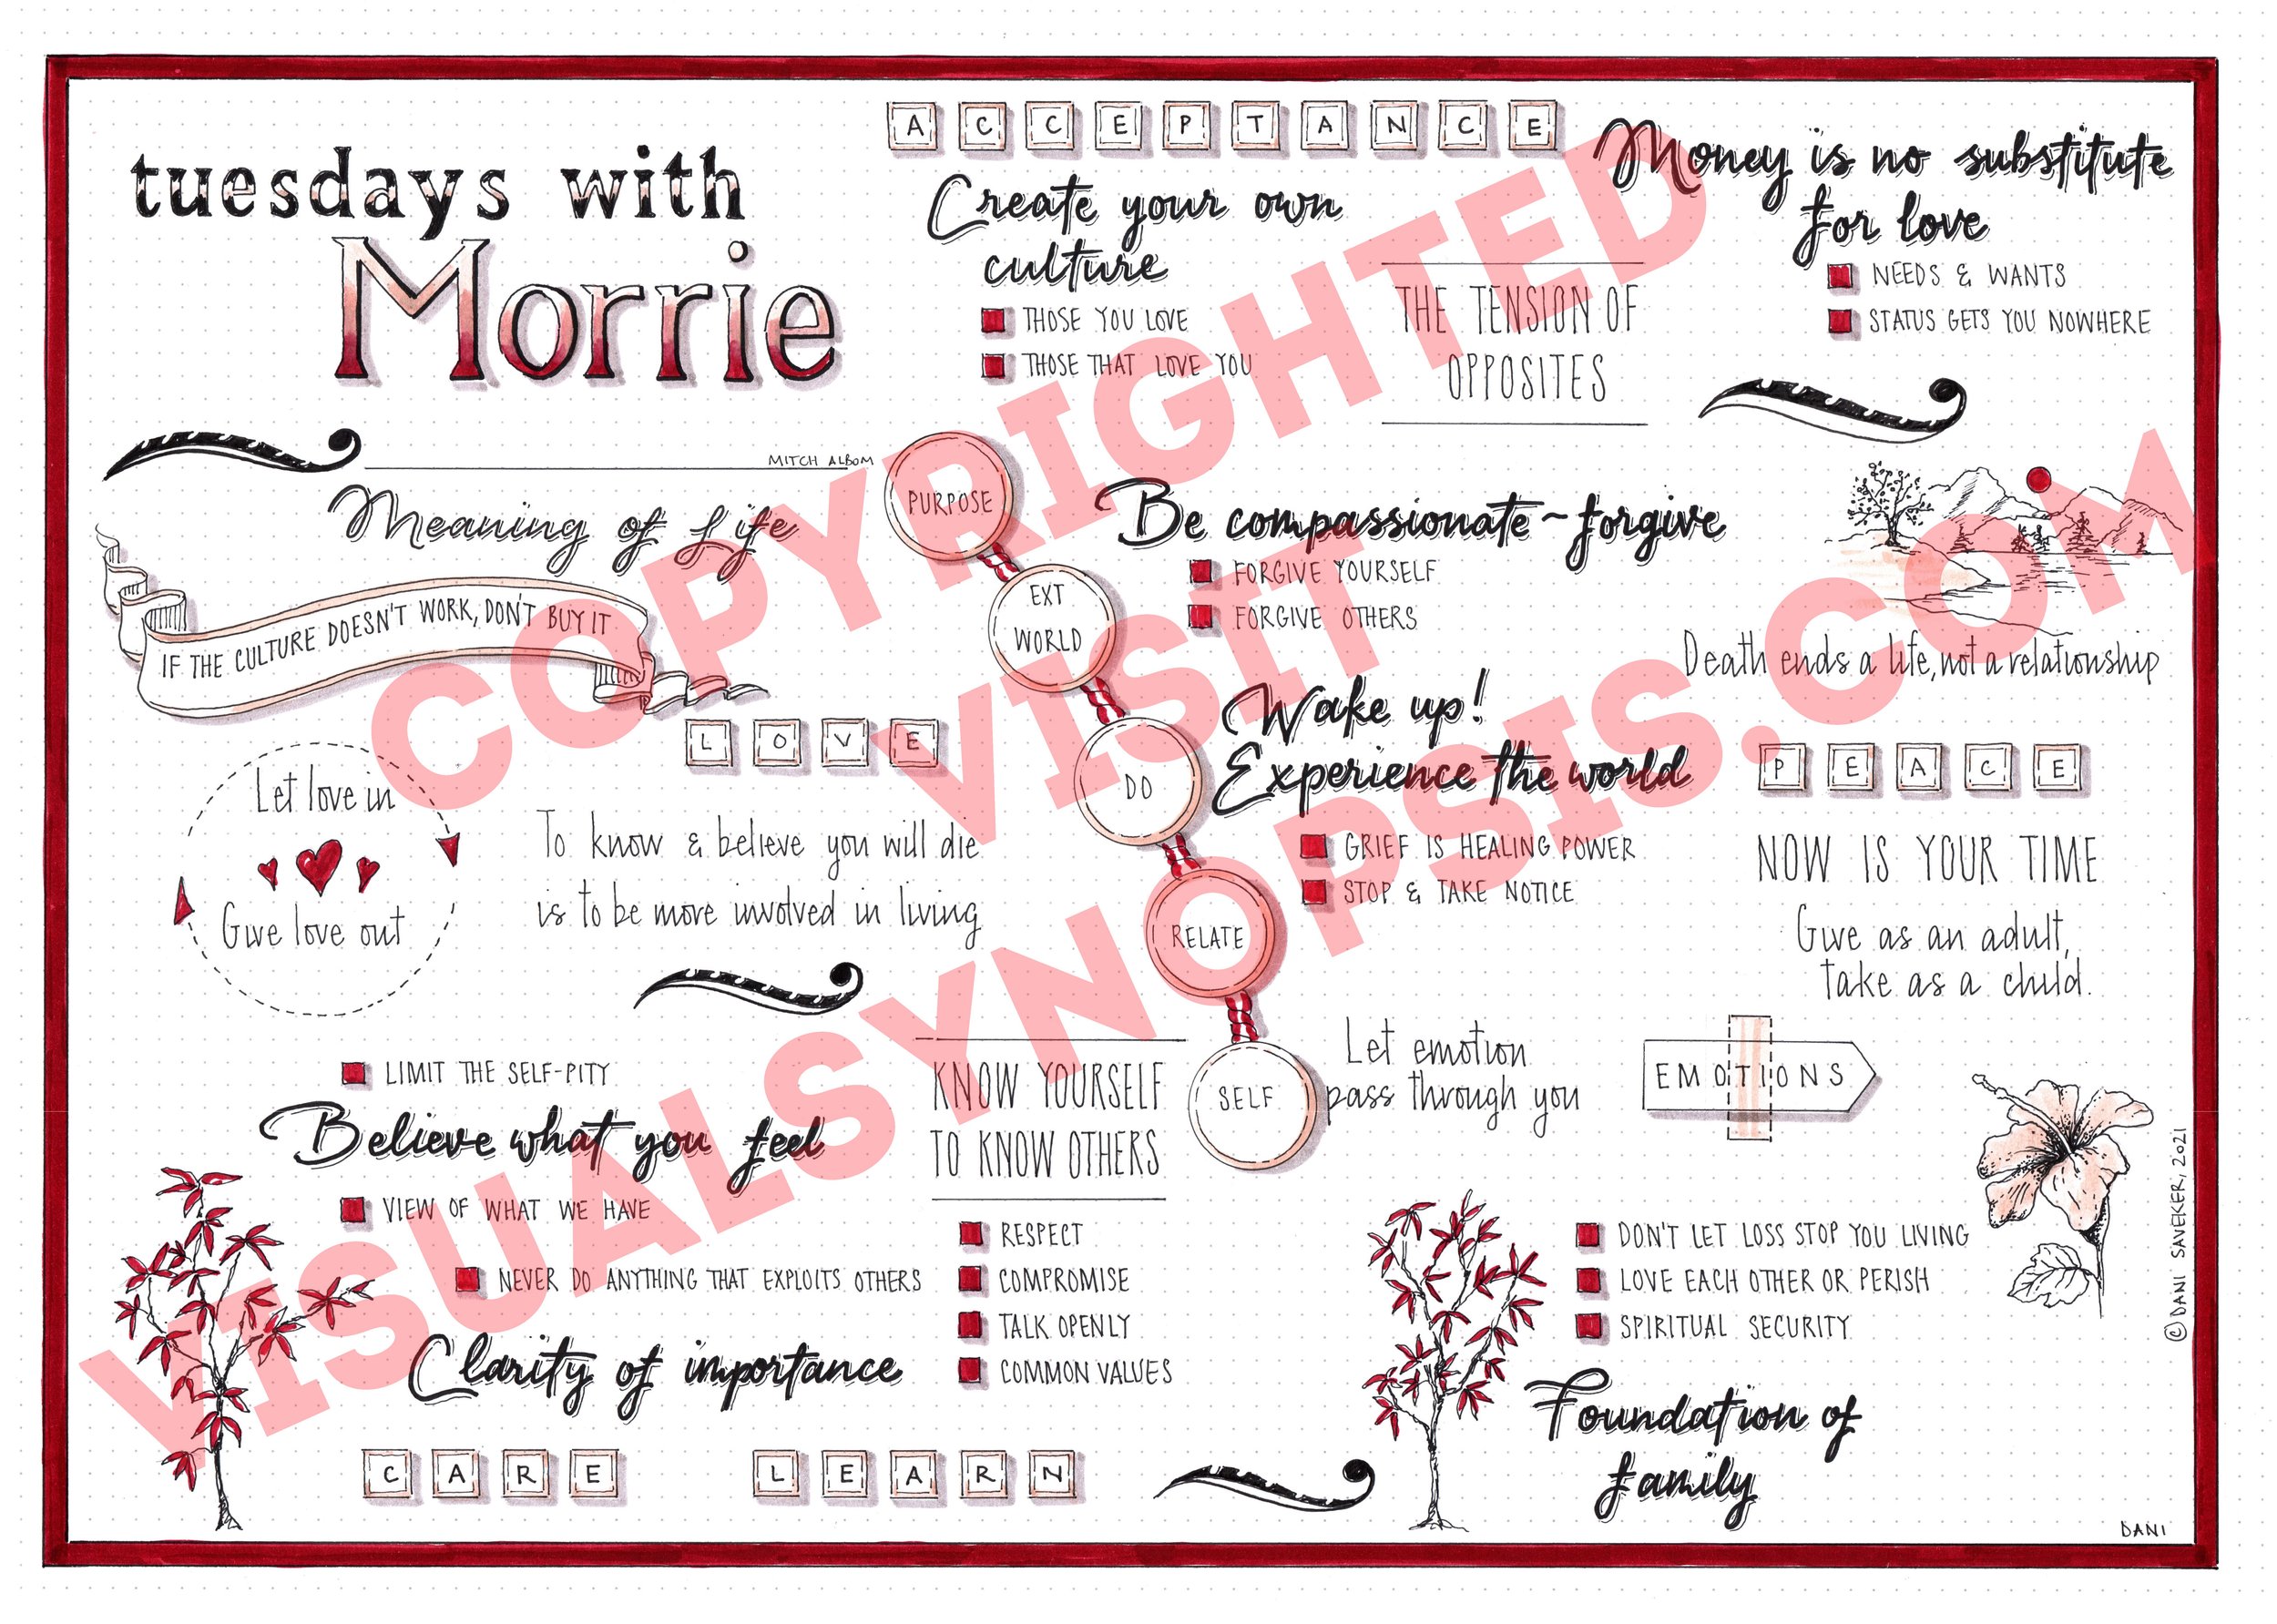 Tuesdays With Morrie (Mitch Albom) visual synopsis by Dani Saveker — Visual  Synopsis